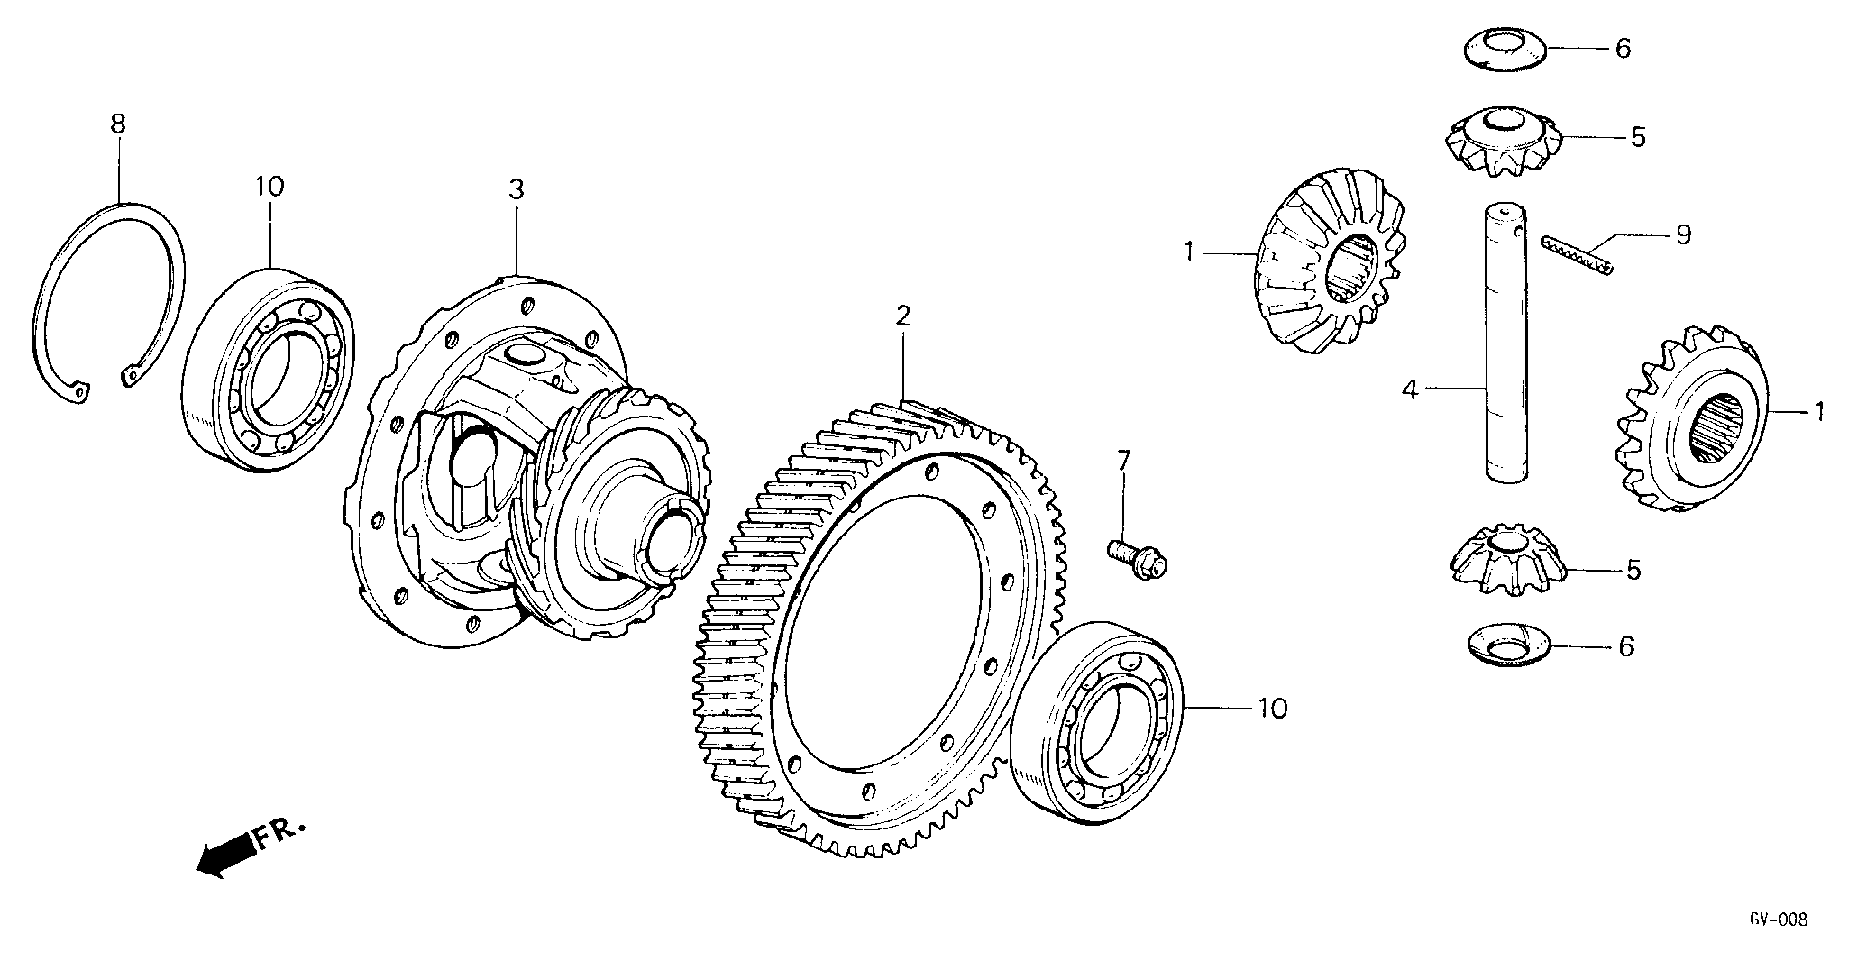 DIFFERENTIAL(1300,1500)